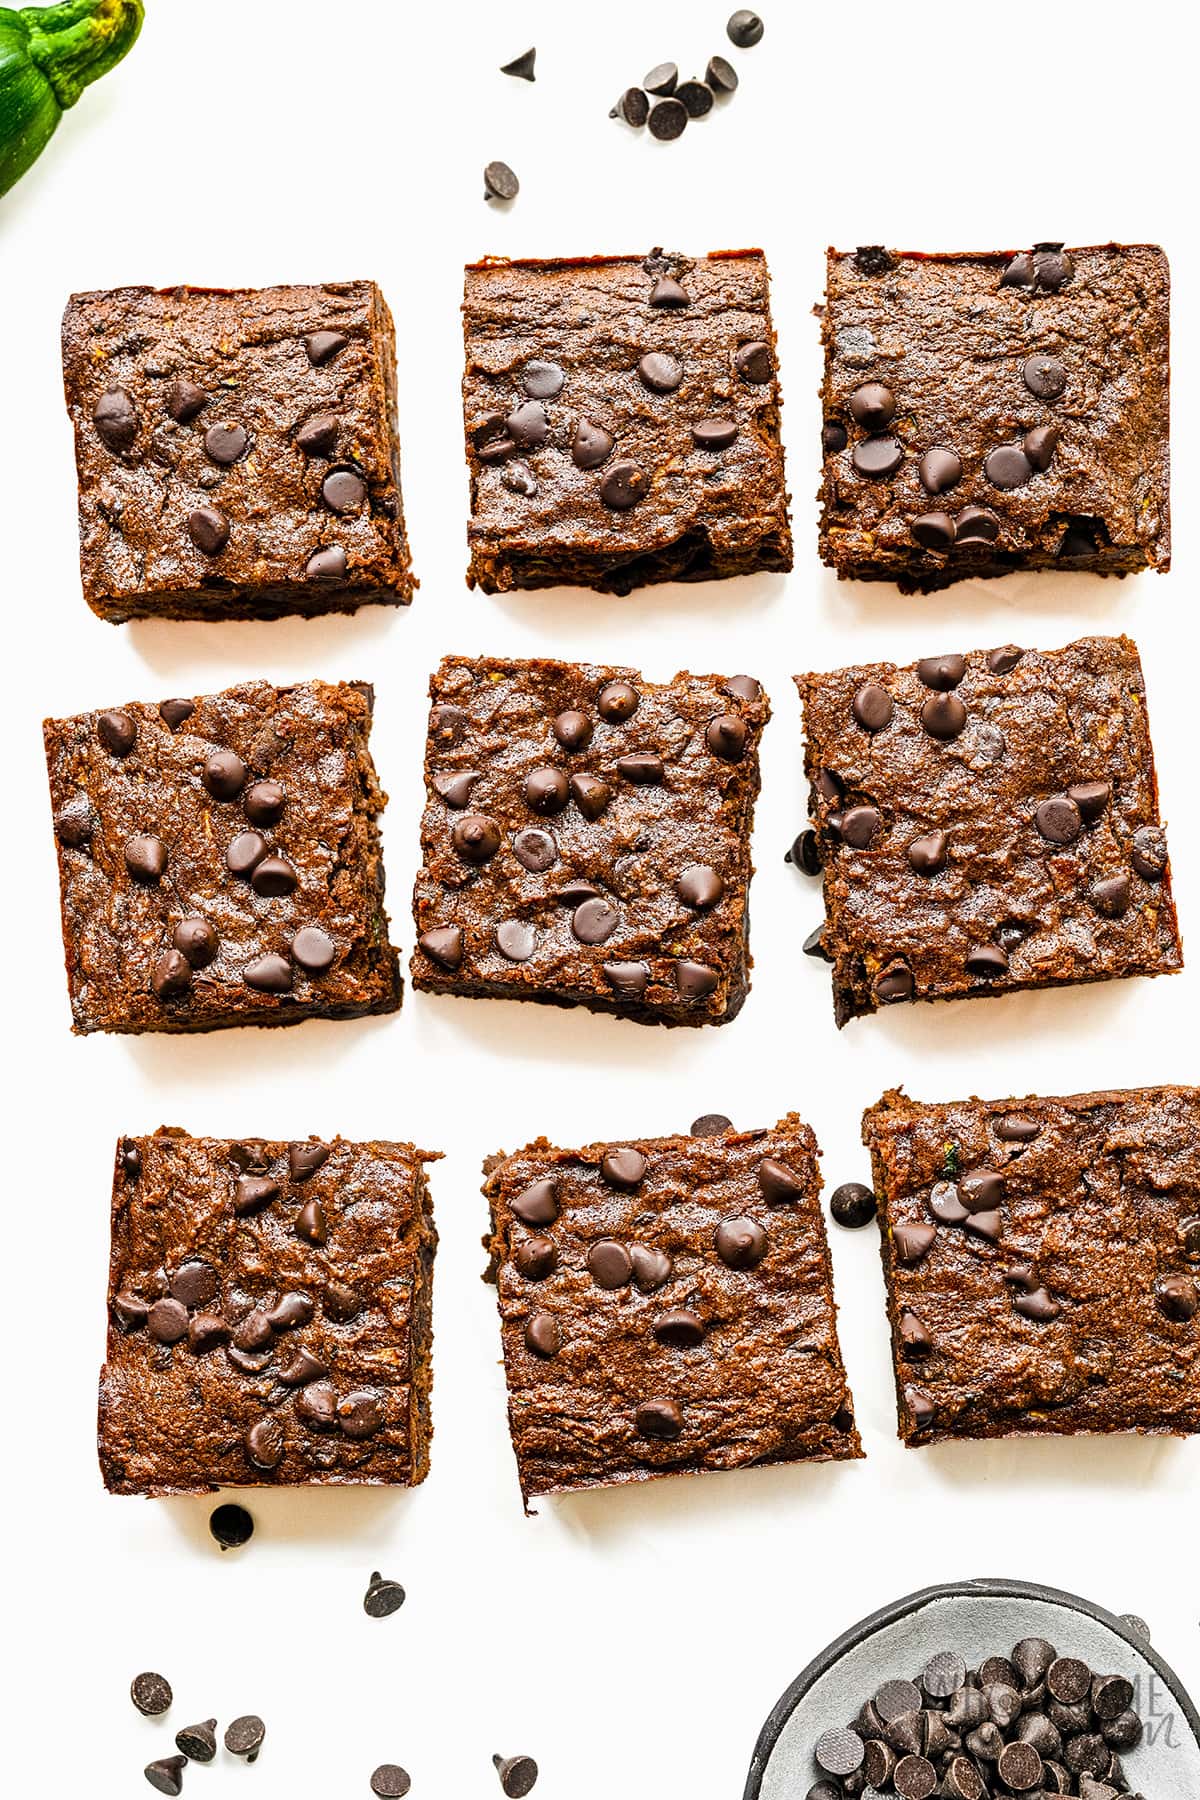 Zucchini brownies cut into squares on a white surface.